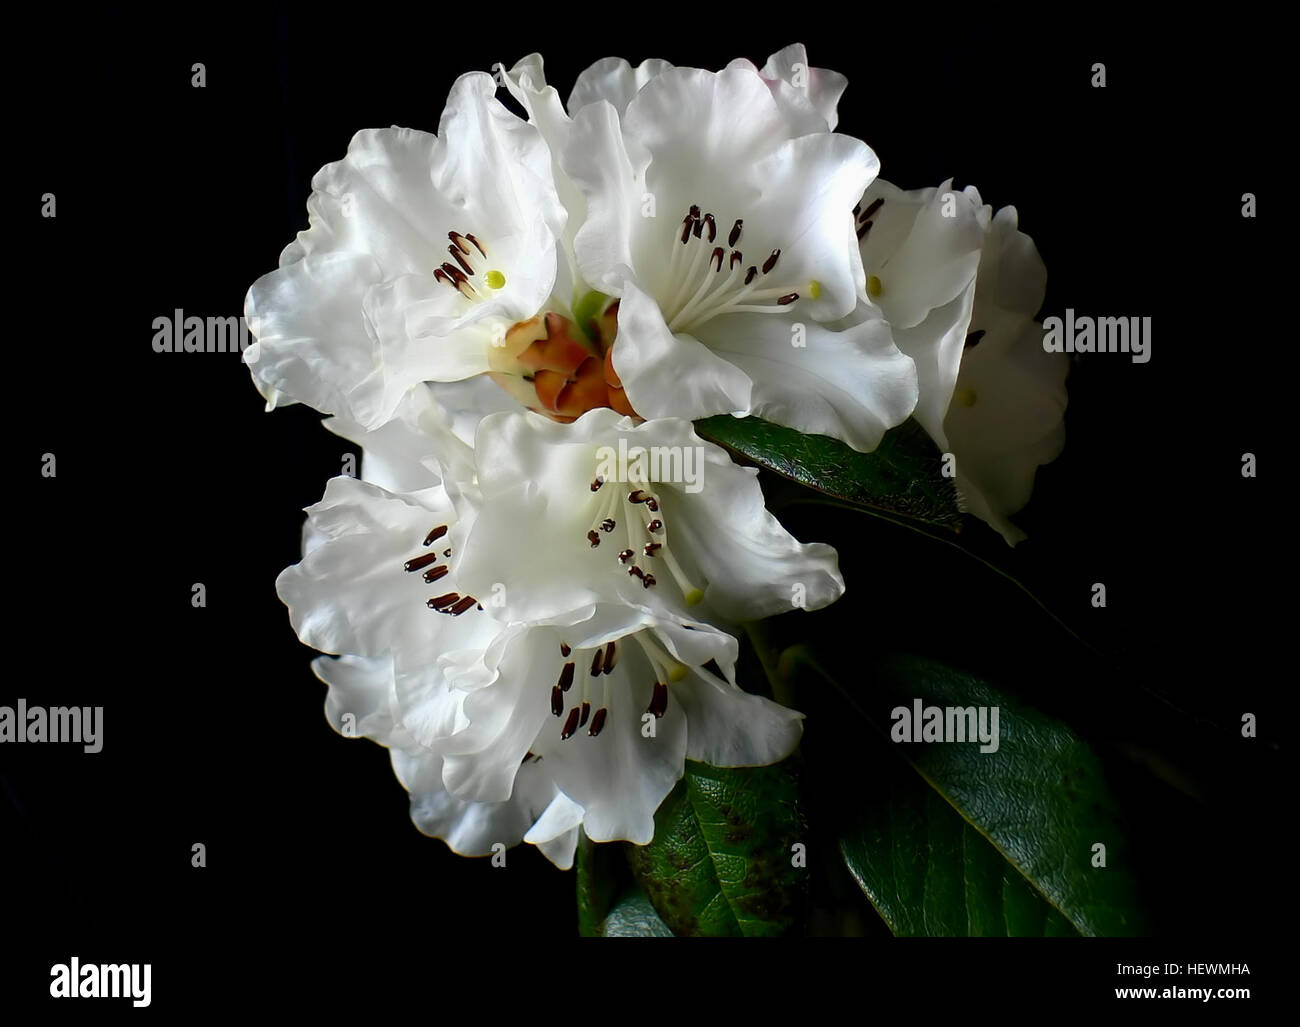 Ication (,),Rhododendron,neige,dame Banque D'Images